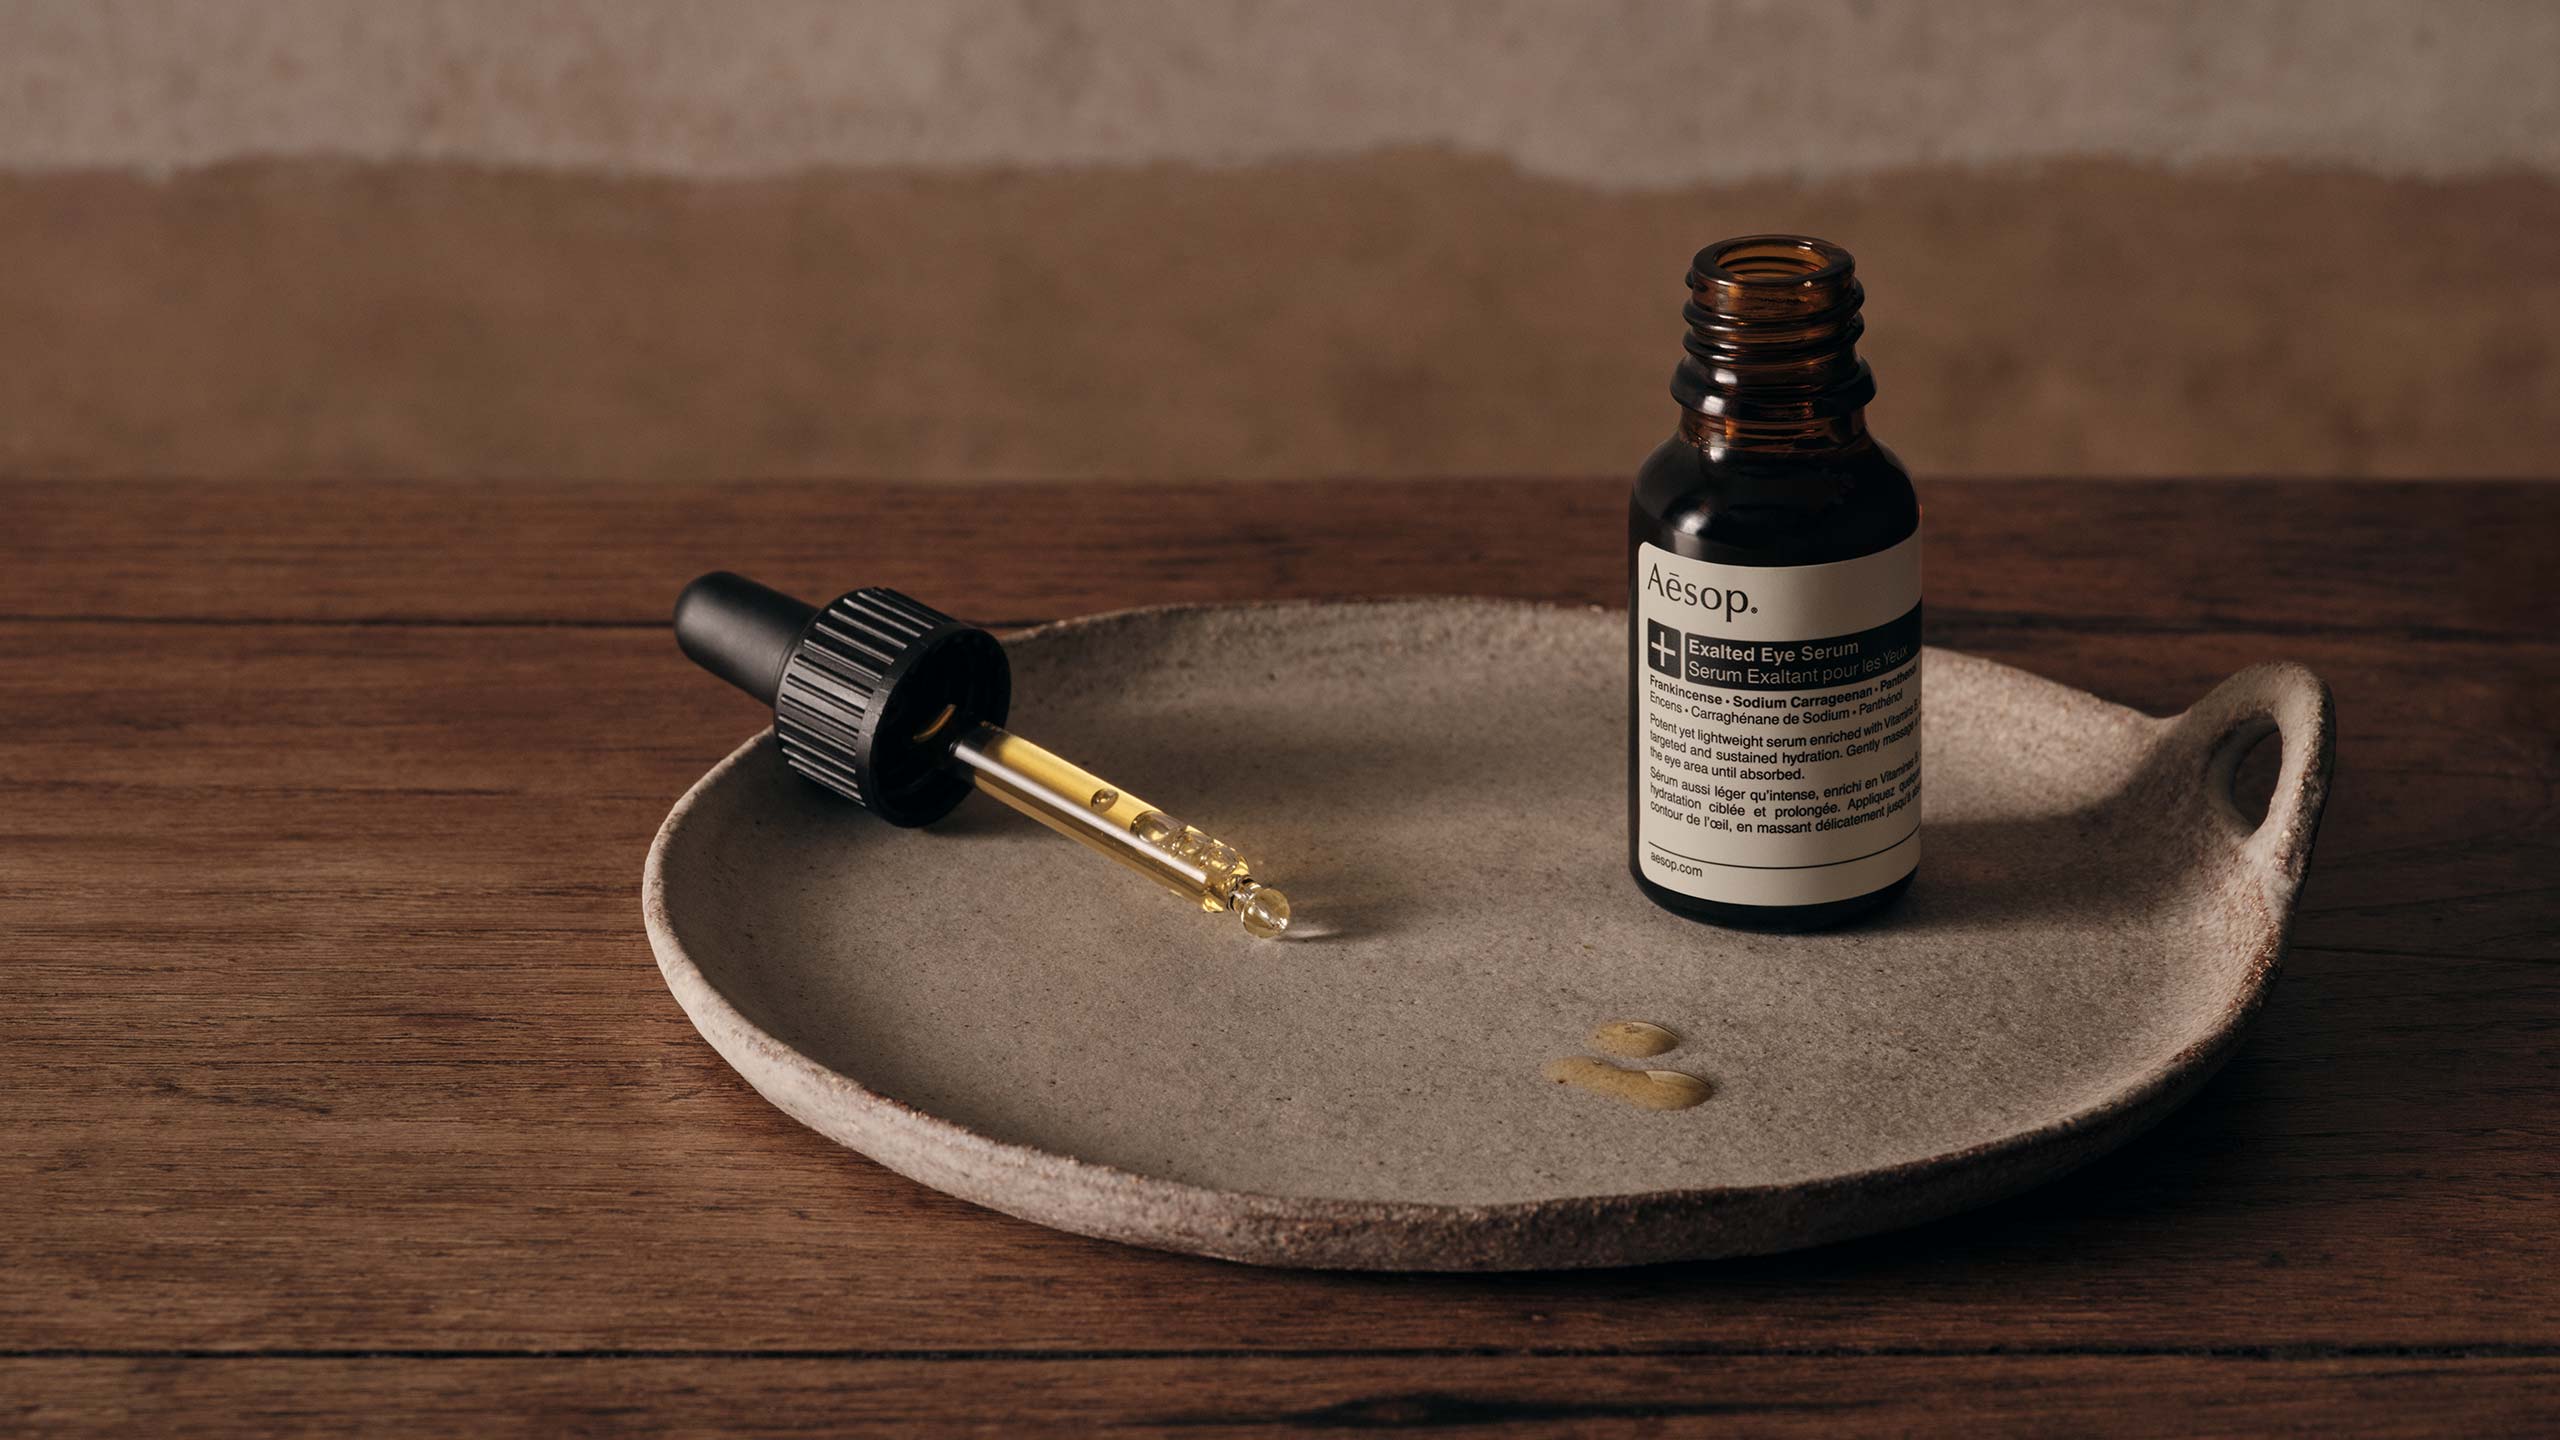 A ceramic plate and a bottle of exalted eye serum placed on a wooden surface